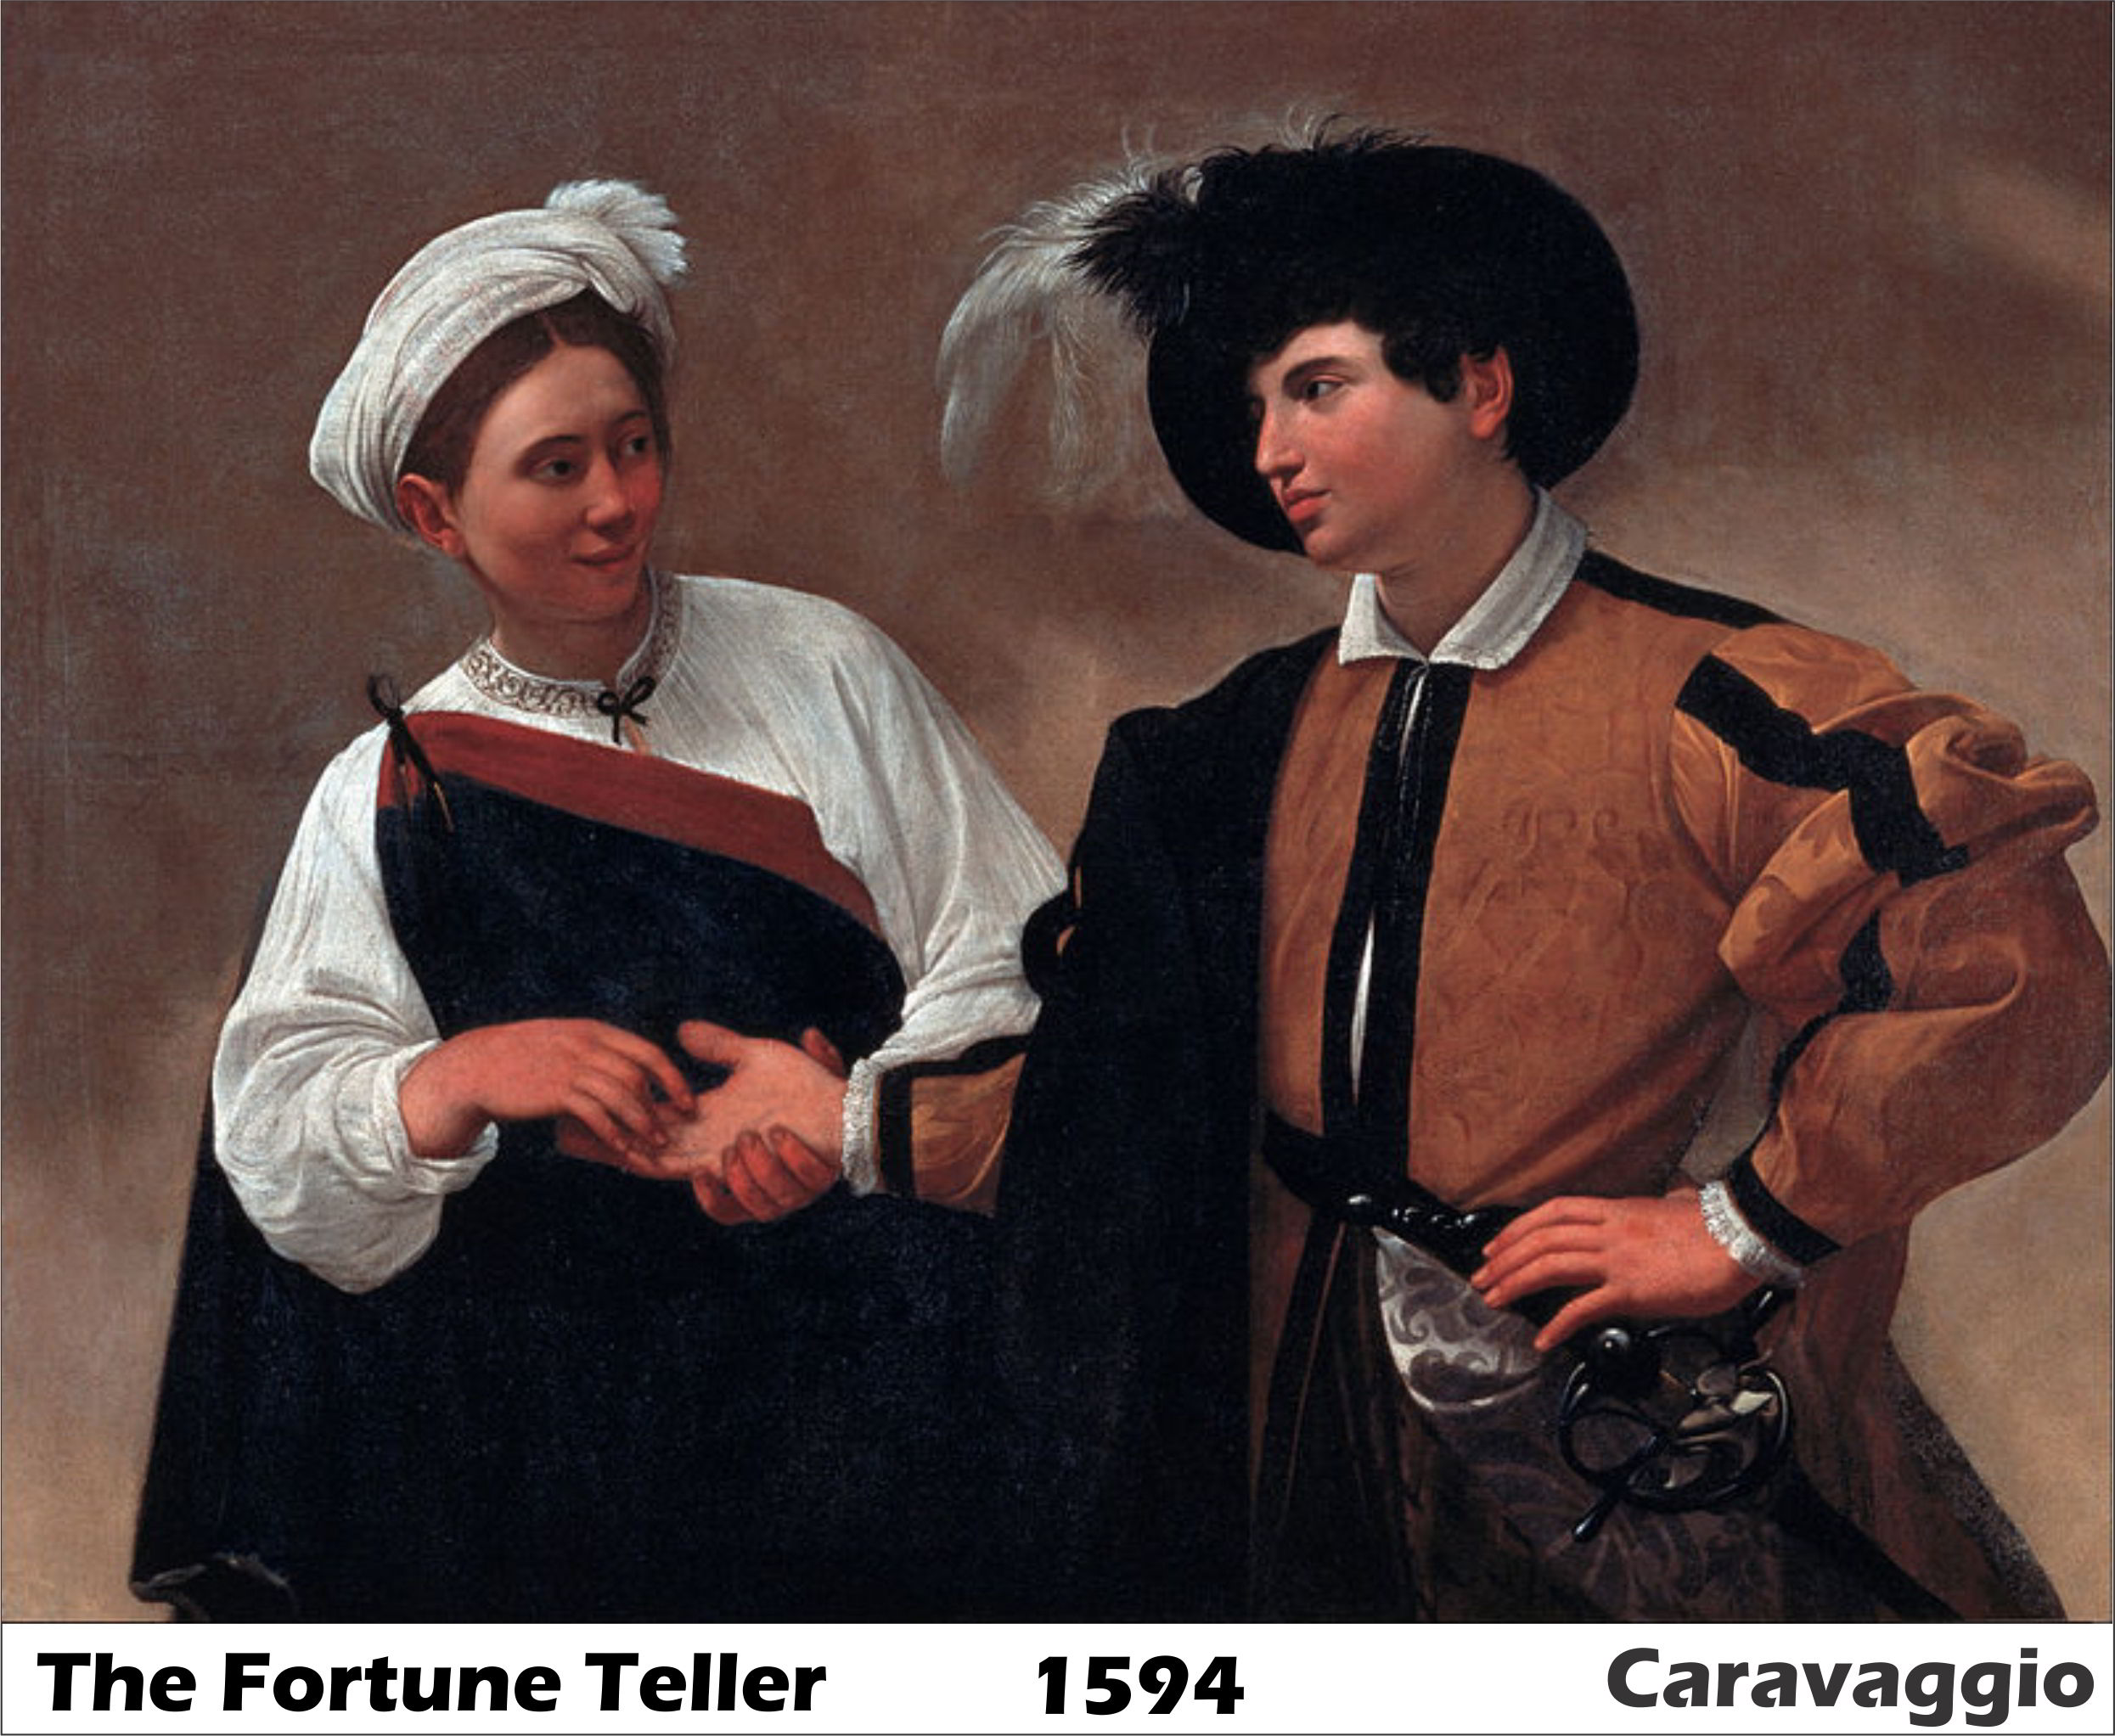 The Fortune Teller by Caravaggio